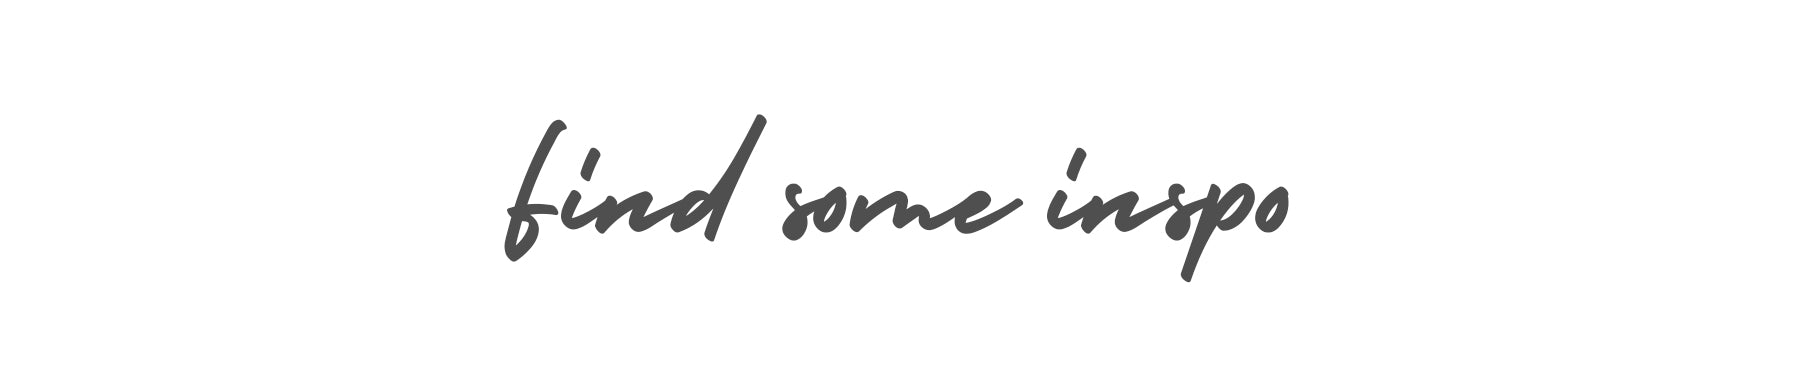 Handwritten message "Find some inspo" to guide you in finding your inspiration